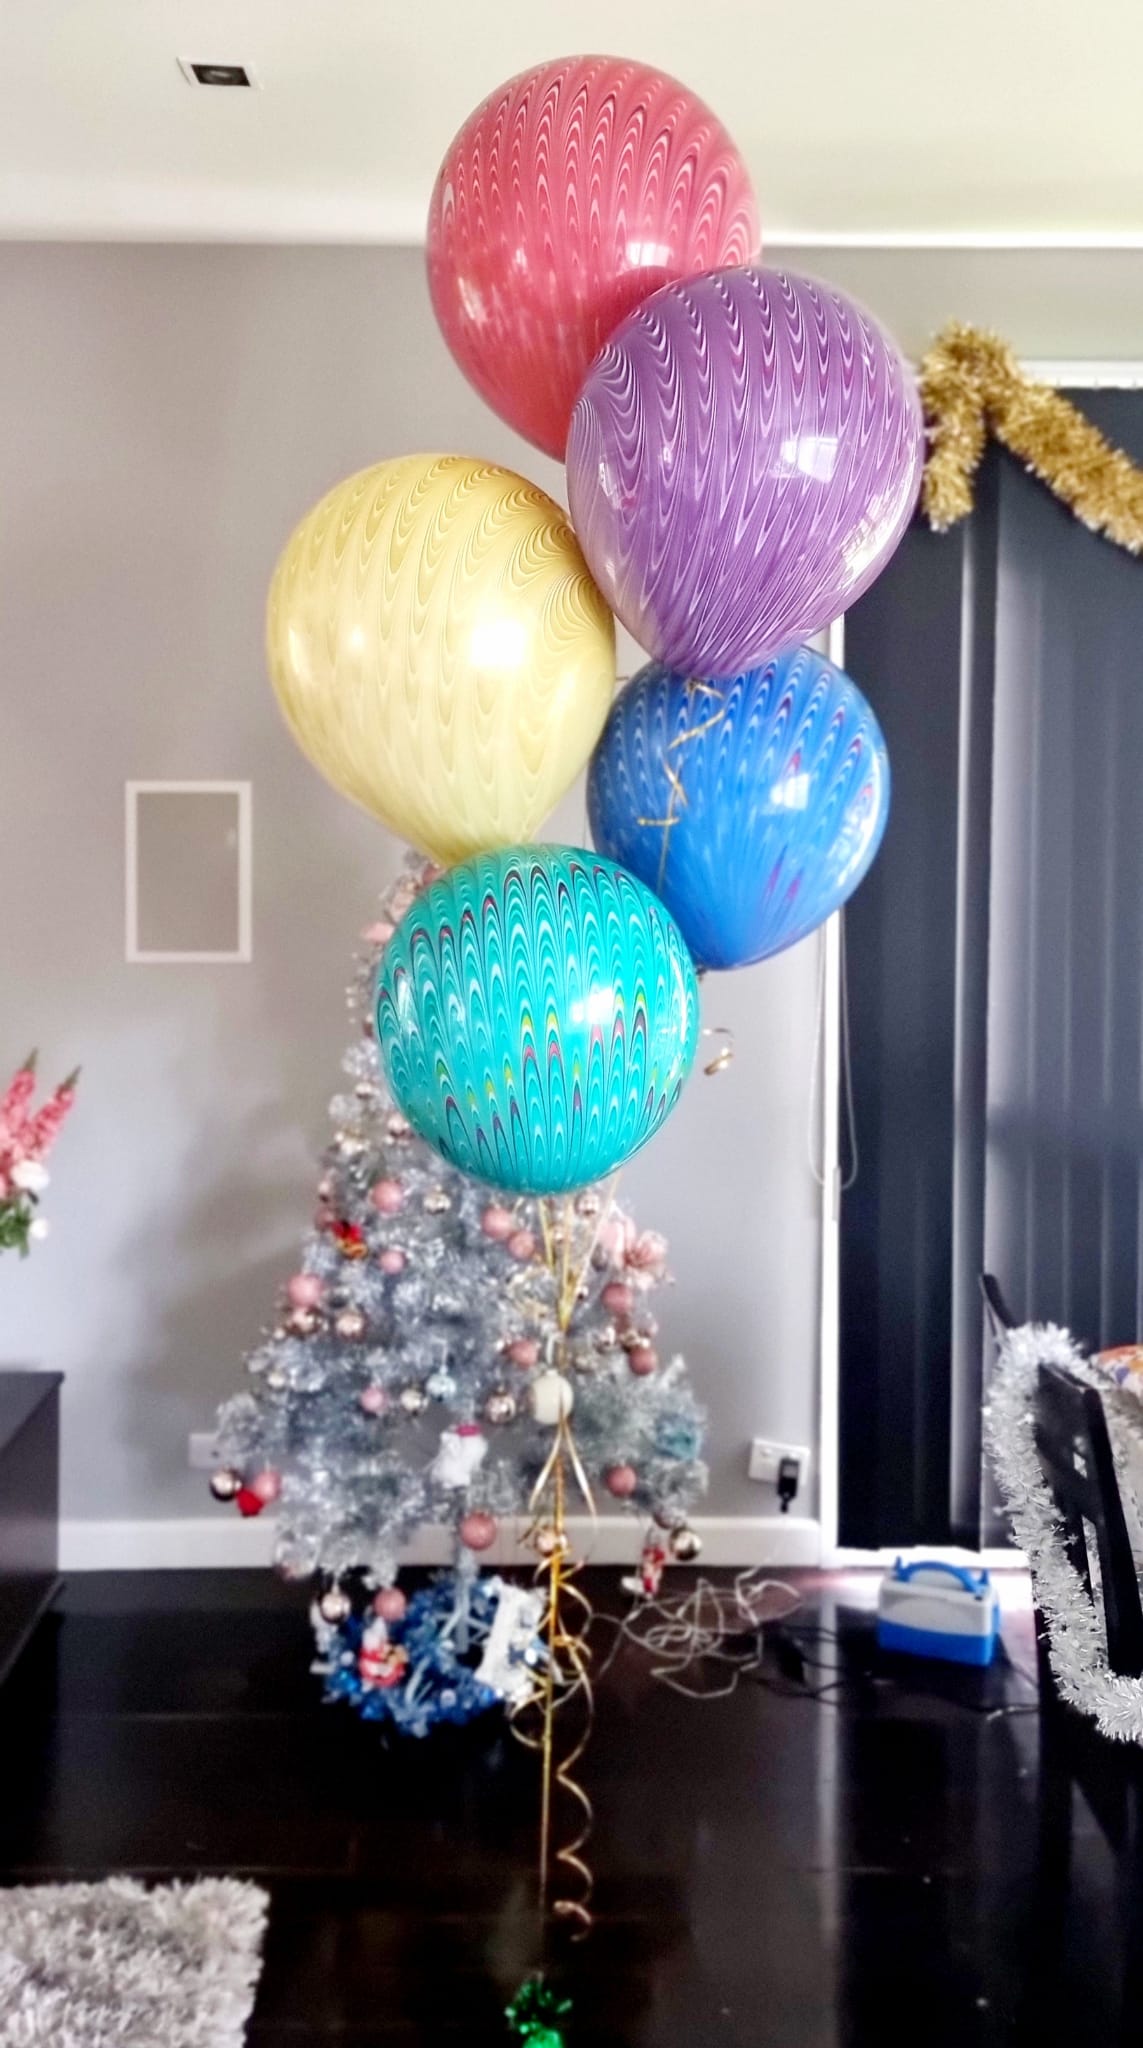 The Five Peacocks Balloon Bouquet (helium-filled)